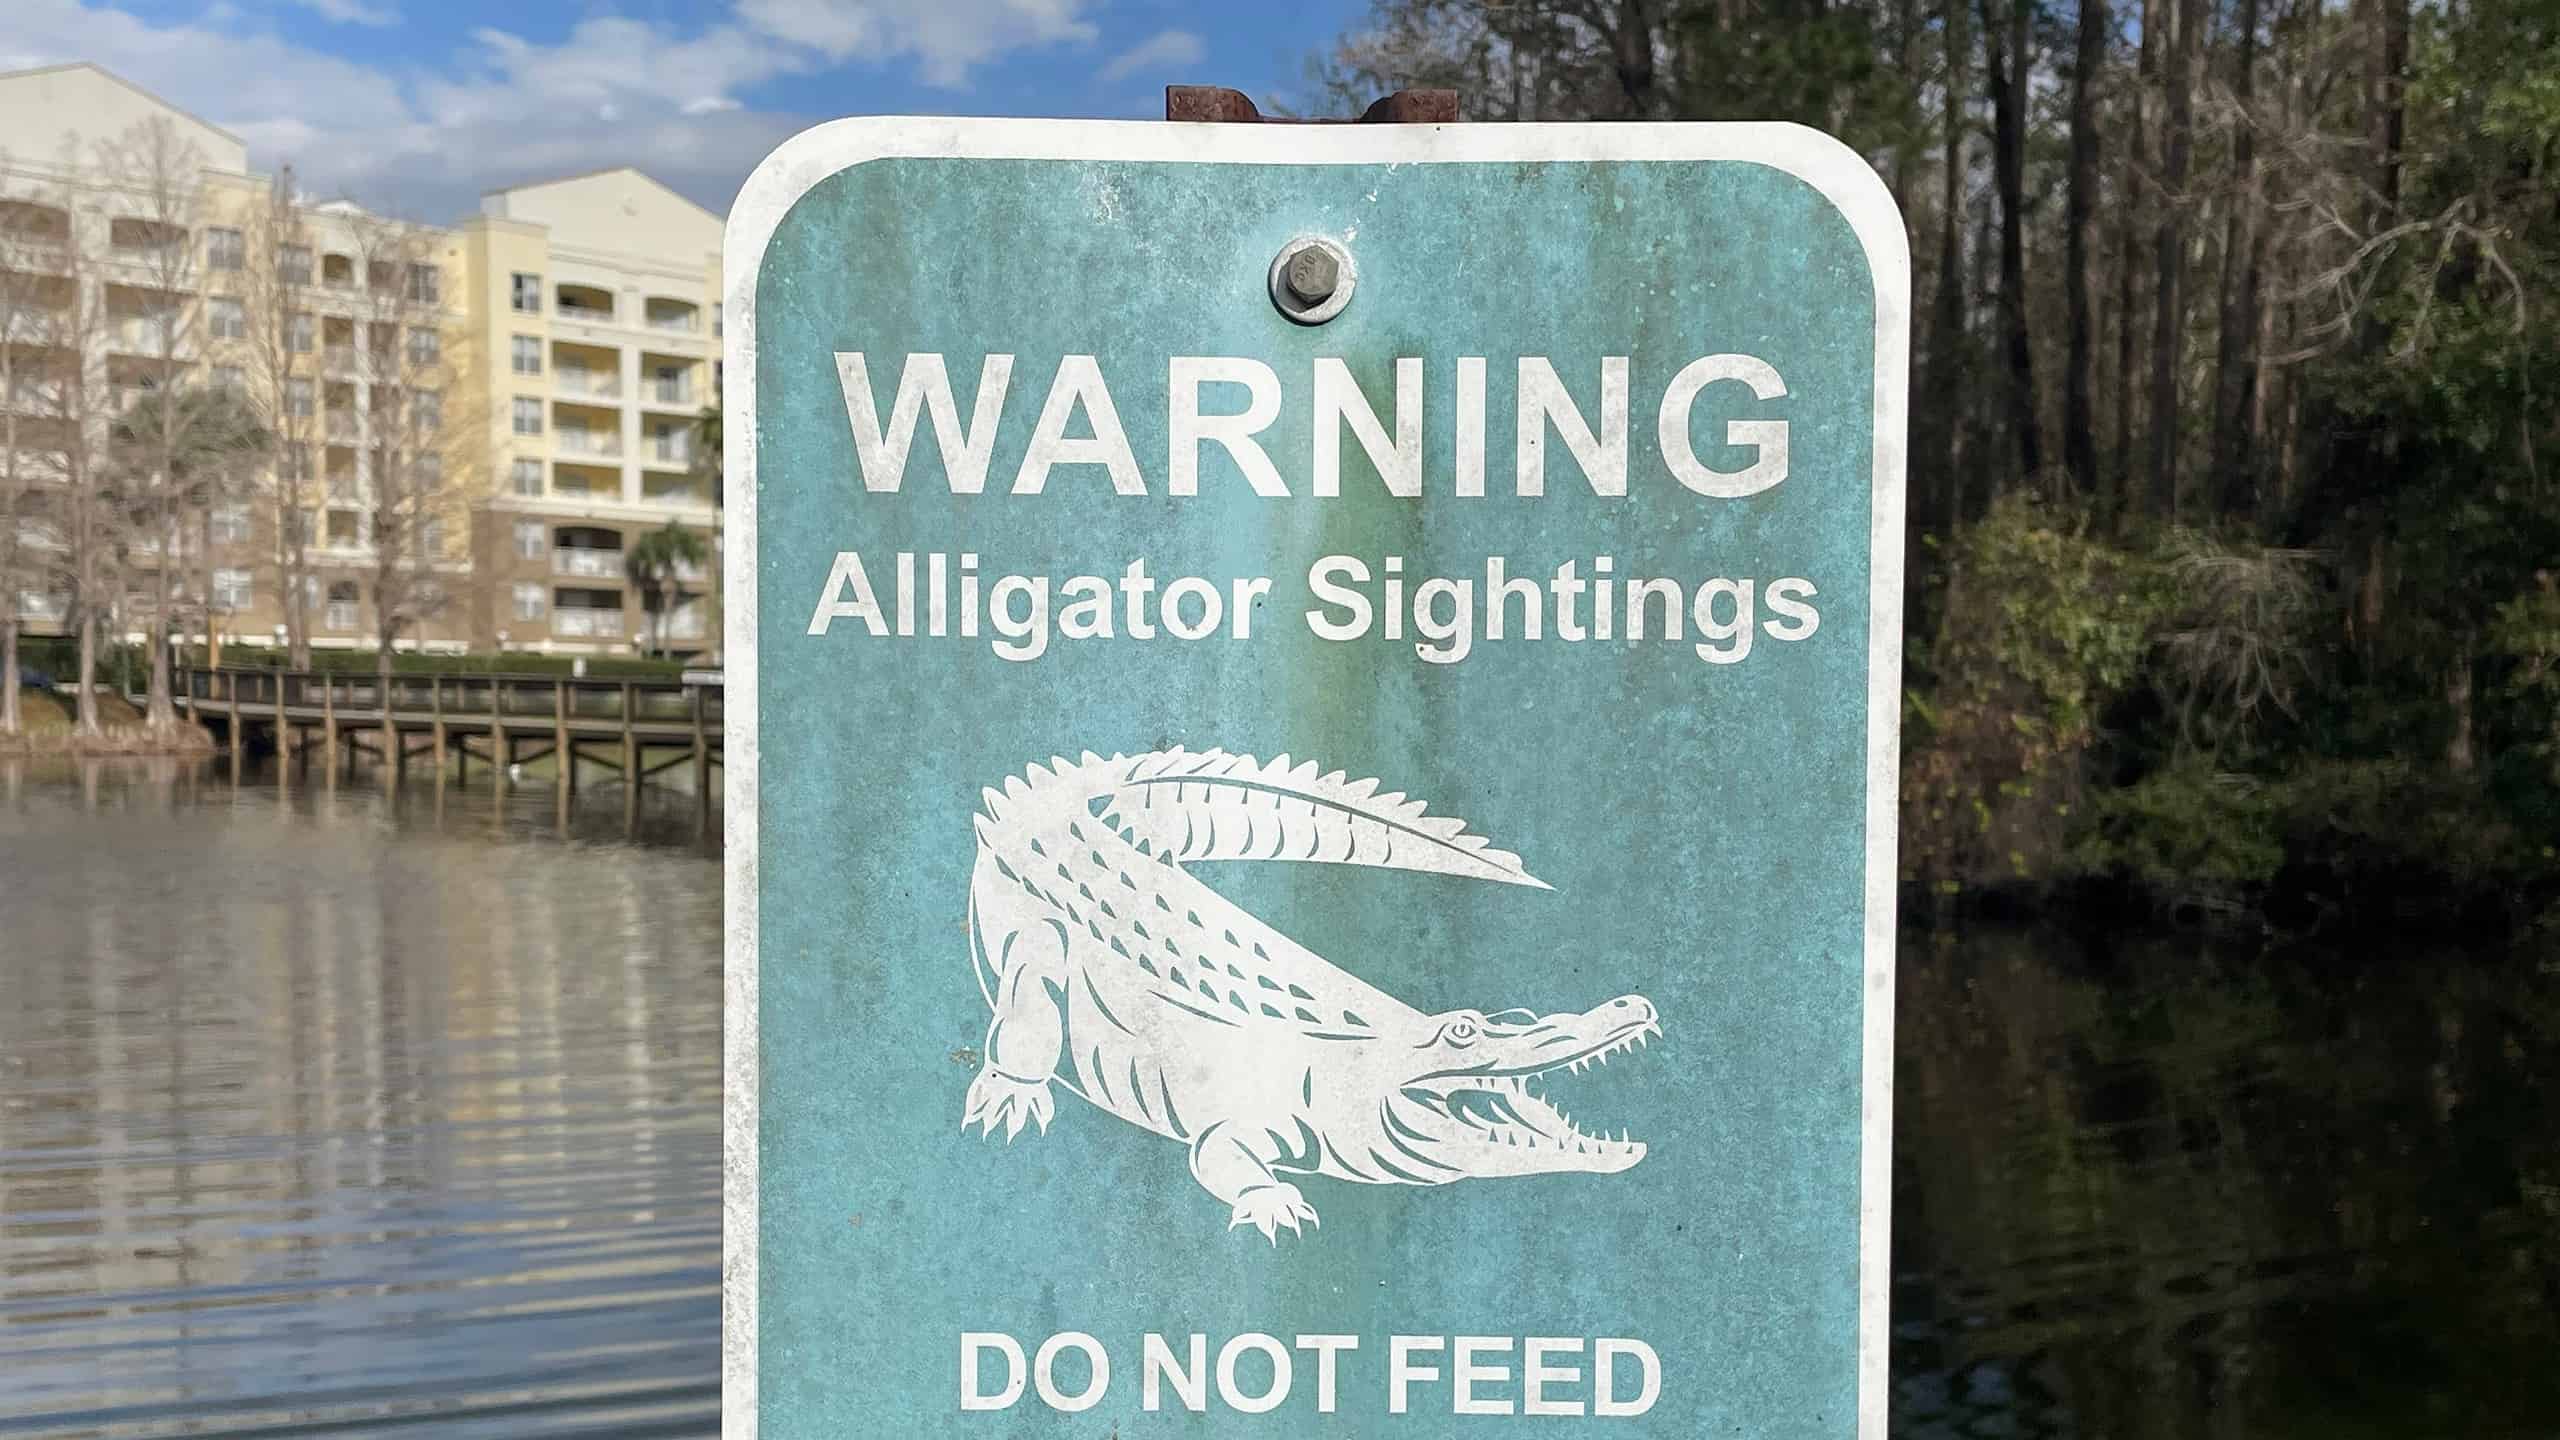 Alligator Warning sign posted in a lake